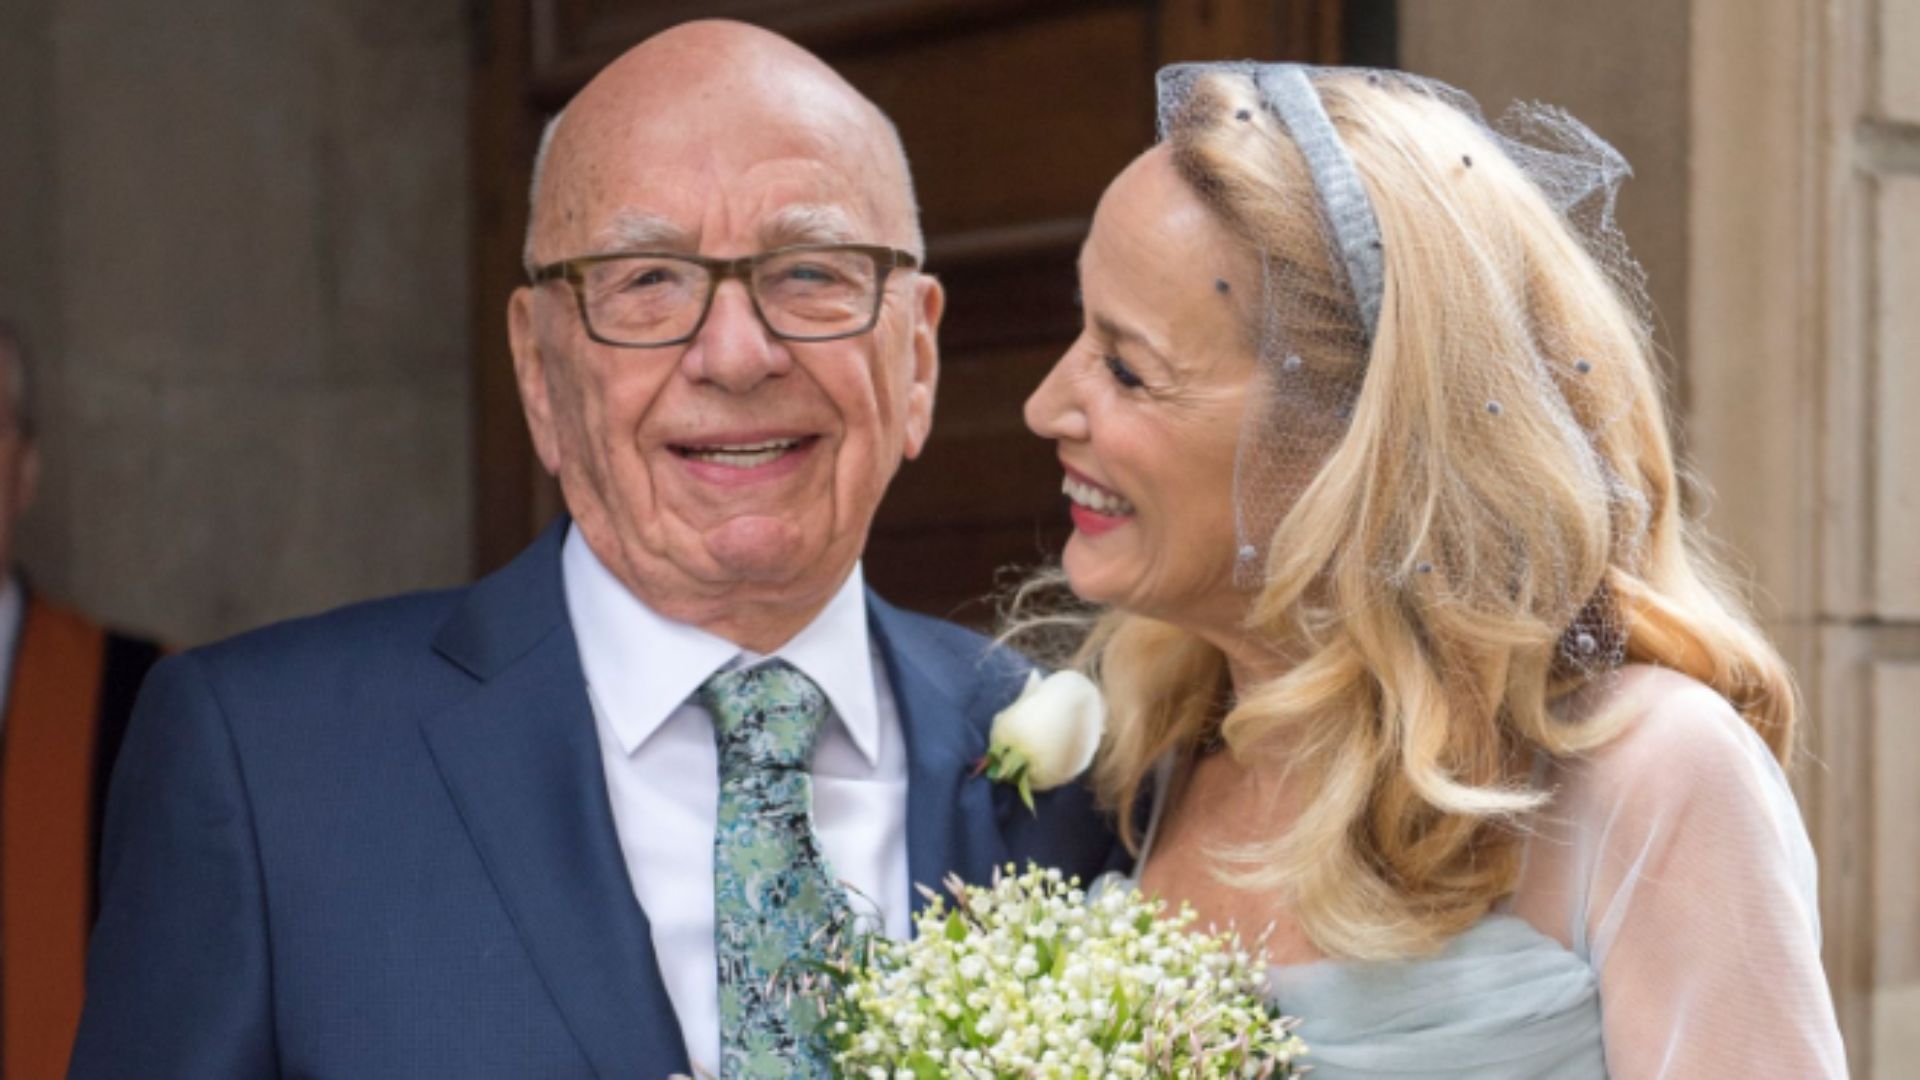 Rupert Murdoch and Jerry Hall to divorce following six years of marriage